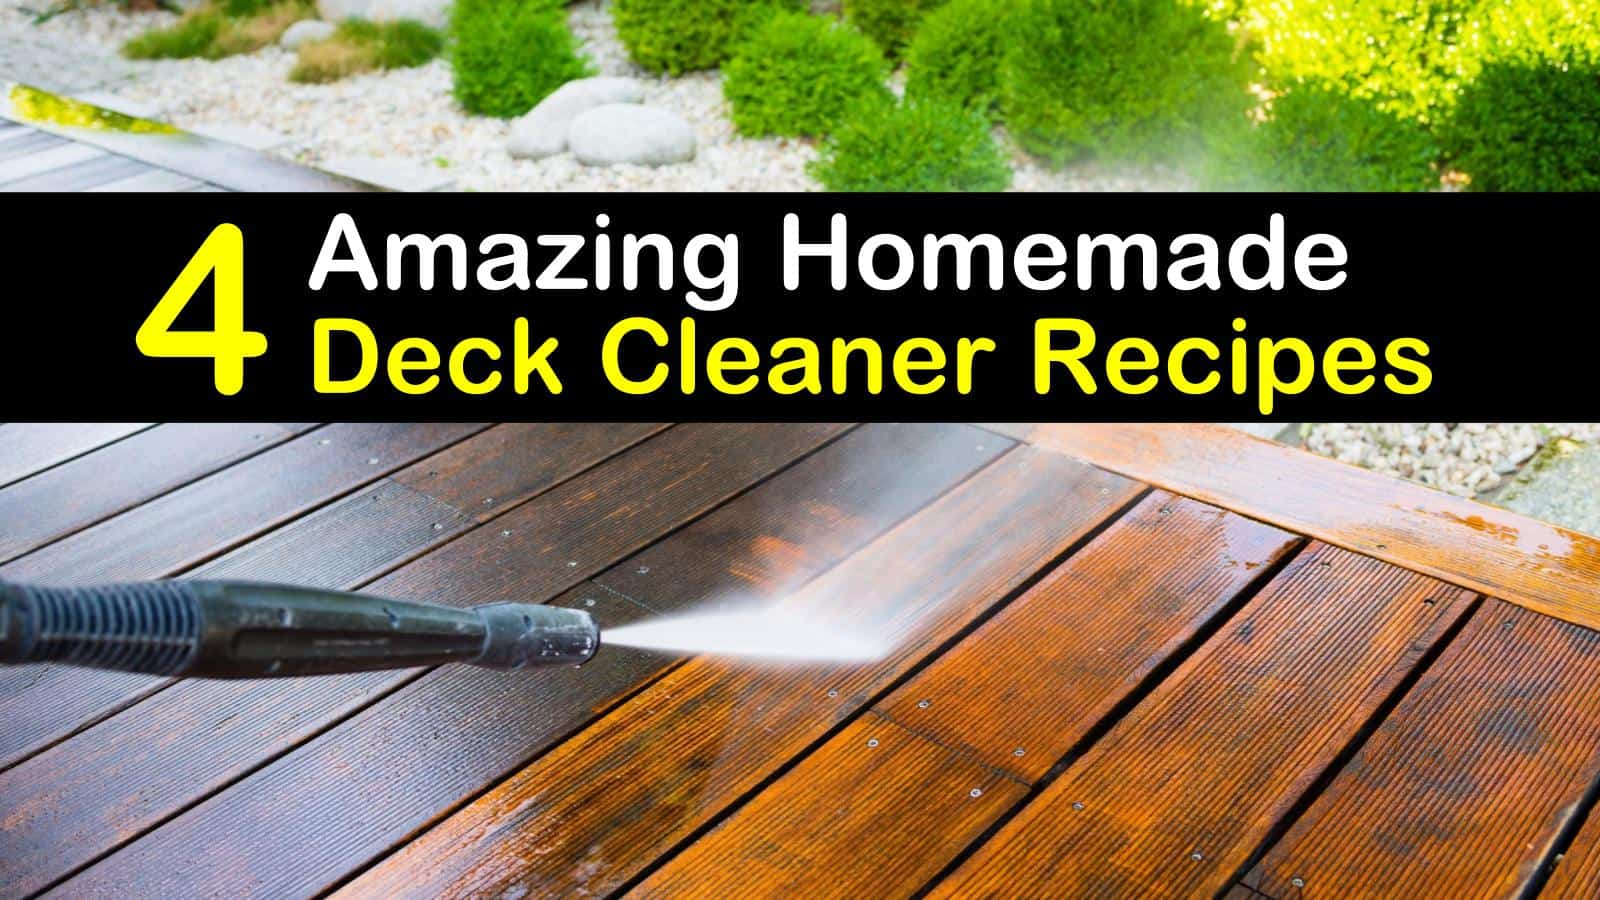 4 Amazing Homemade Deck Cleaner Recipes in dimensions 1600 X 900